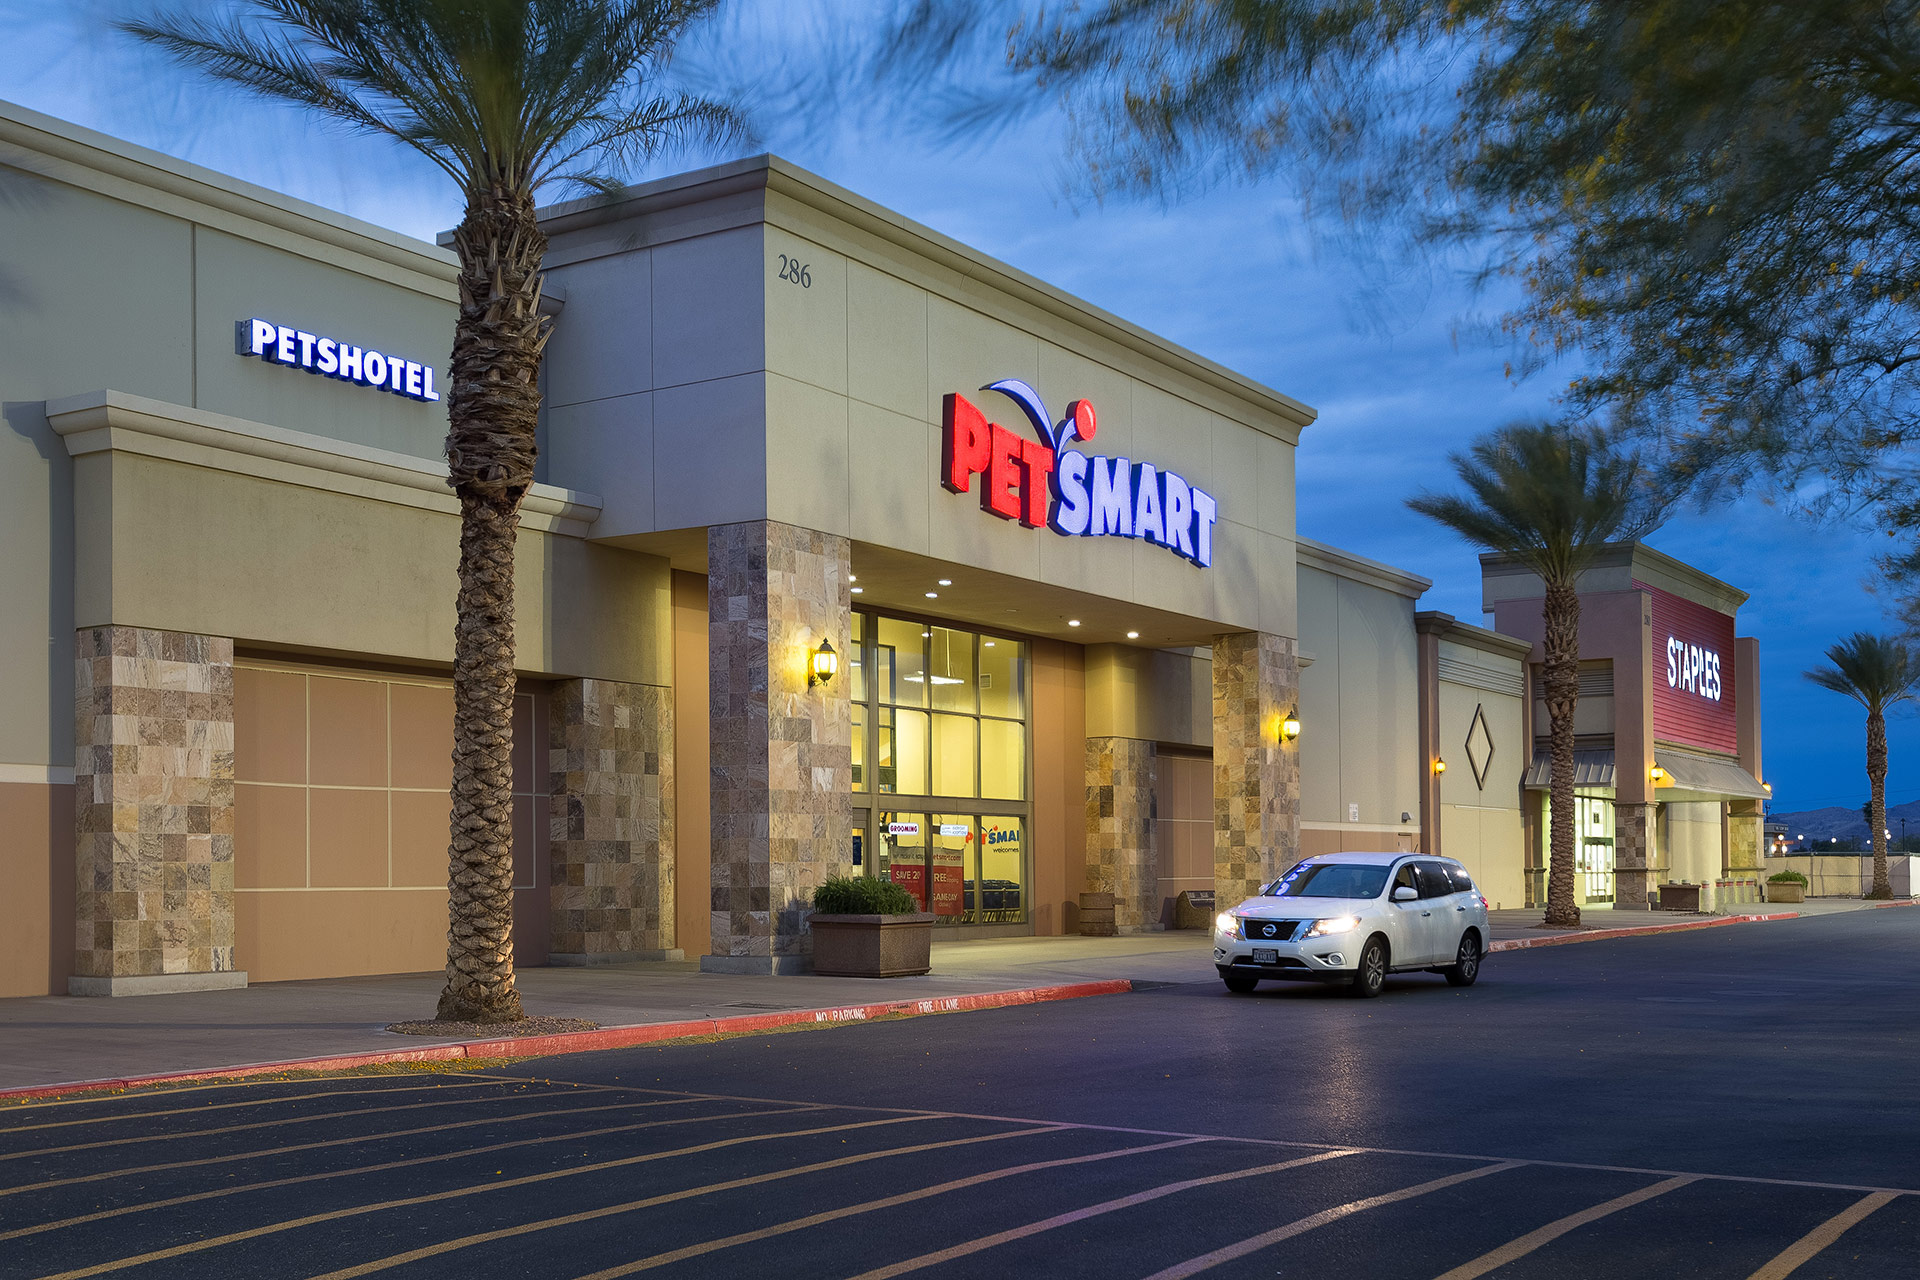 A beige Petsmart retail store at dusk with brown and beige tiled accents on pillars, palm trees and a white car in front and a Staples store beside it.